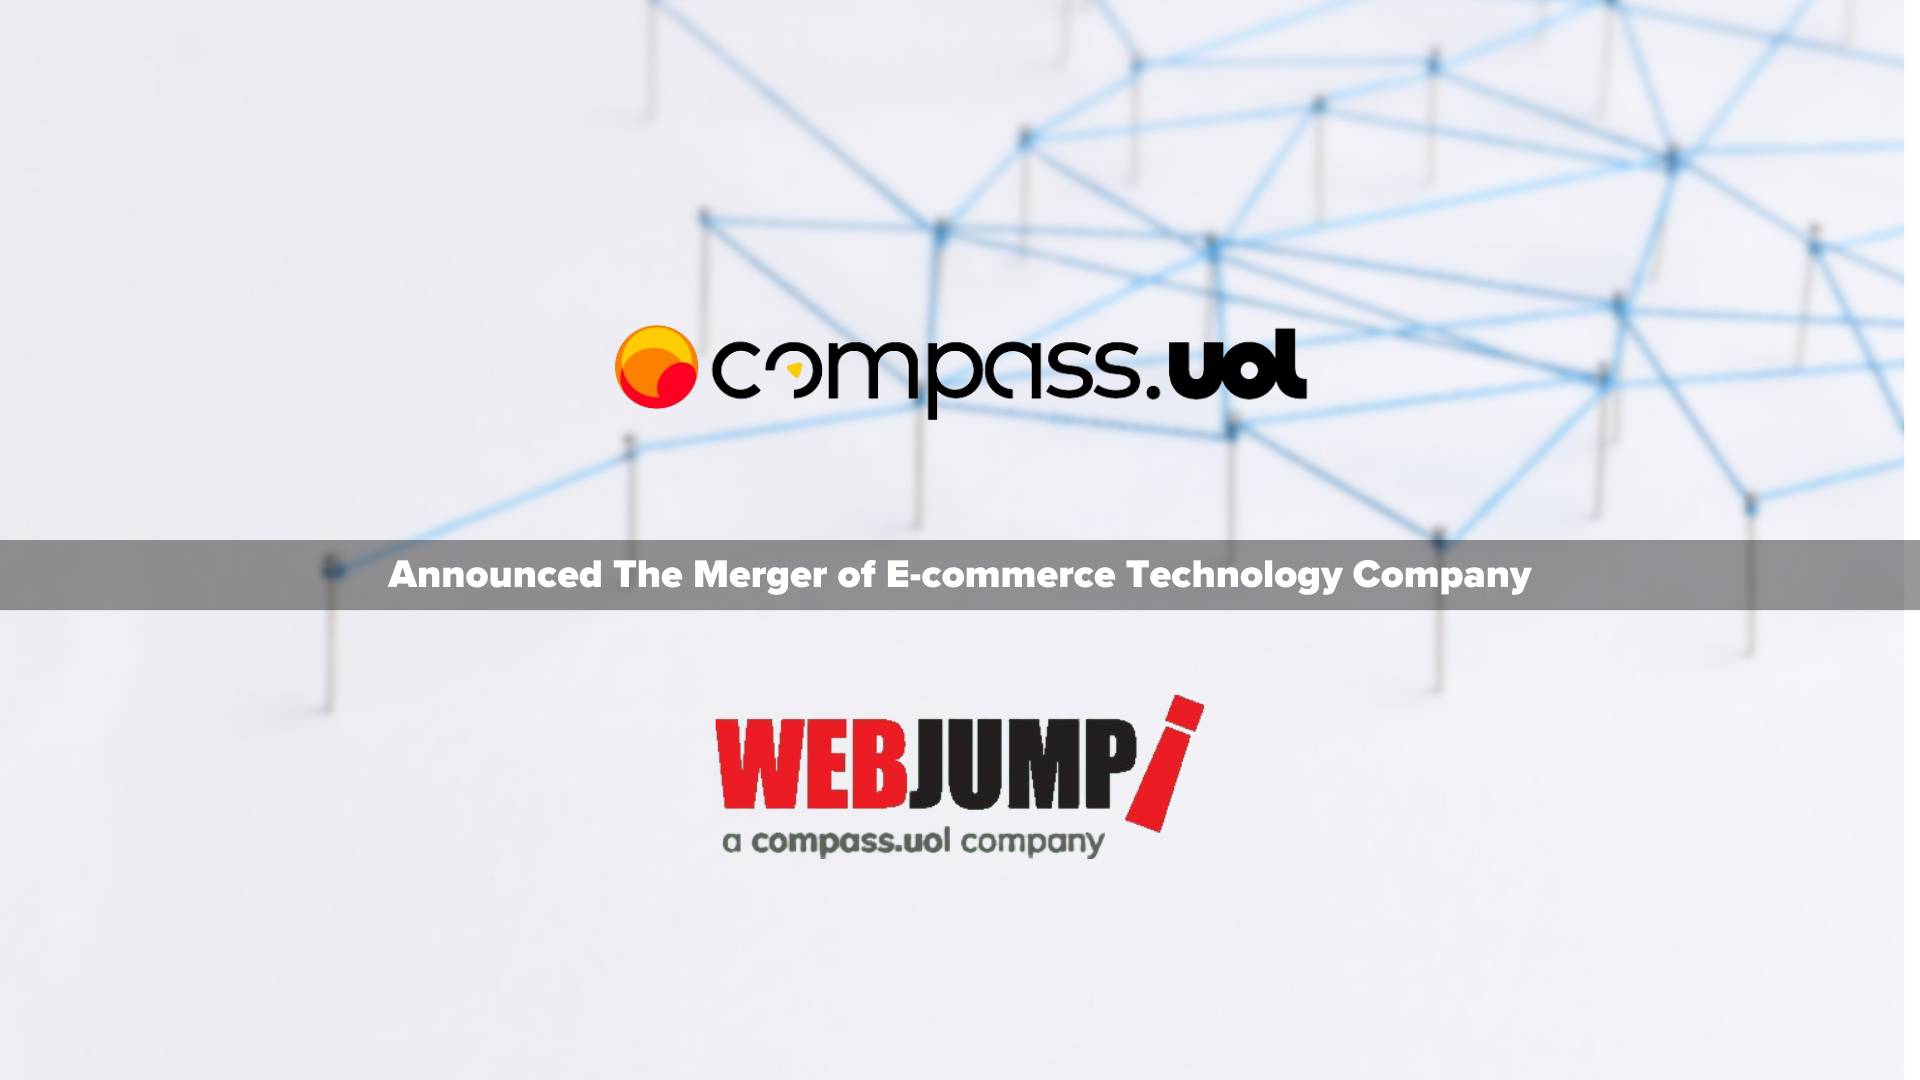 Webjump creates unique Data, AI and Gen AI offerings for Content and Commerce with Adobe and becomes Global Platinum Partner